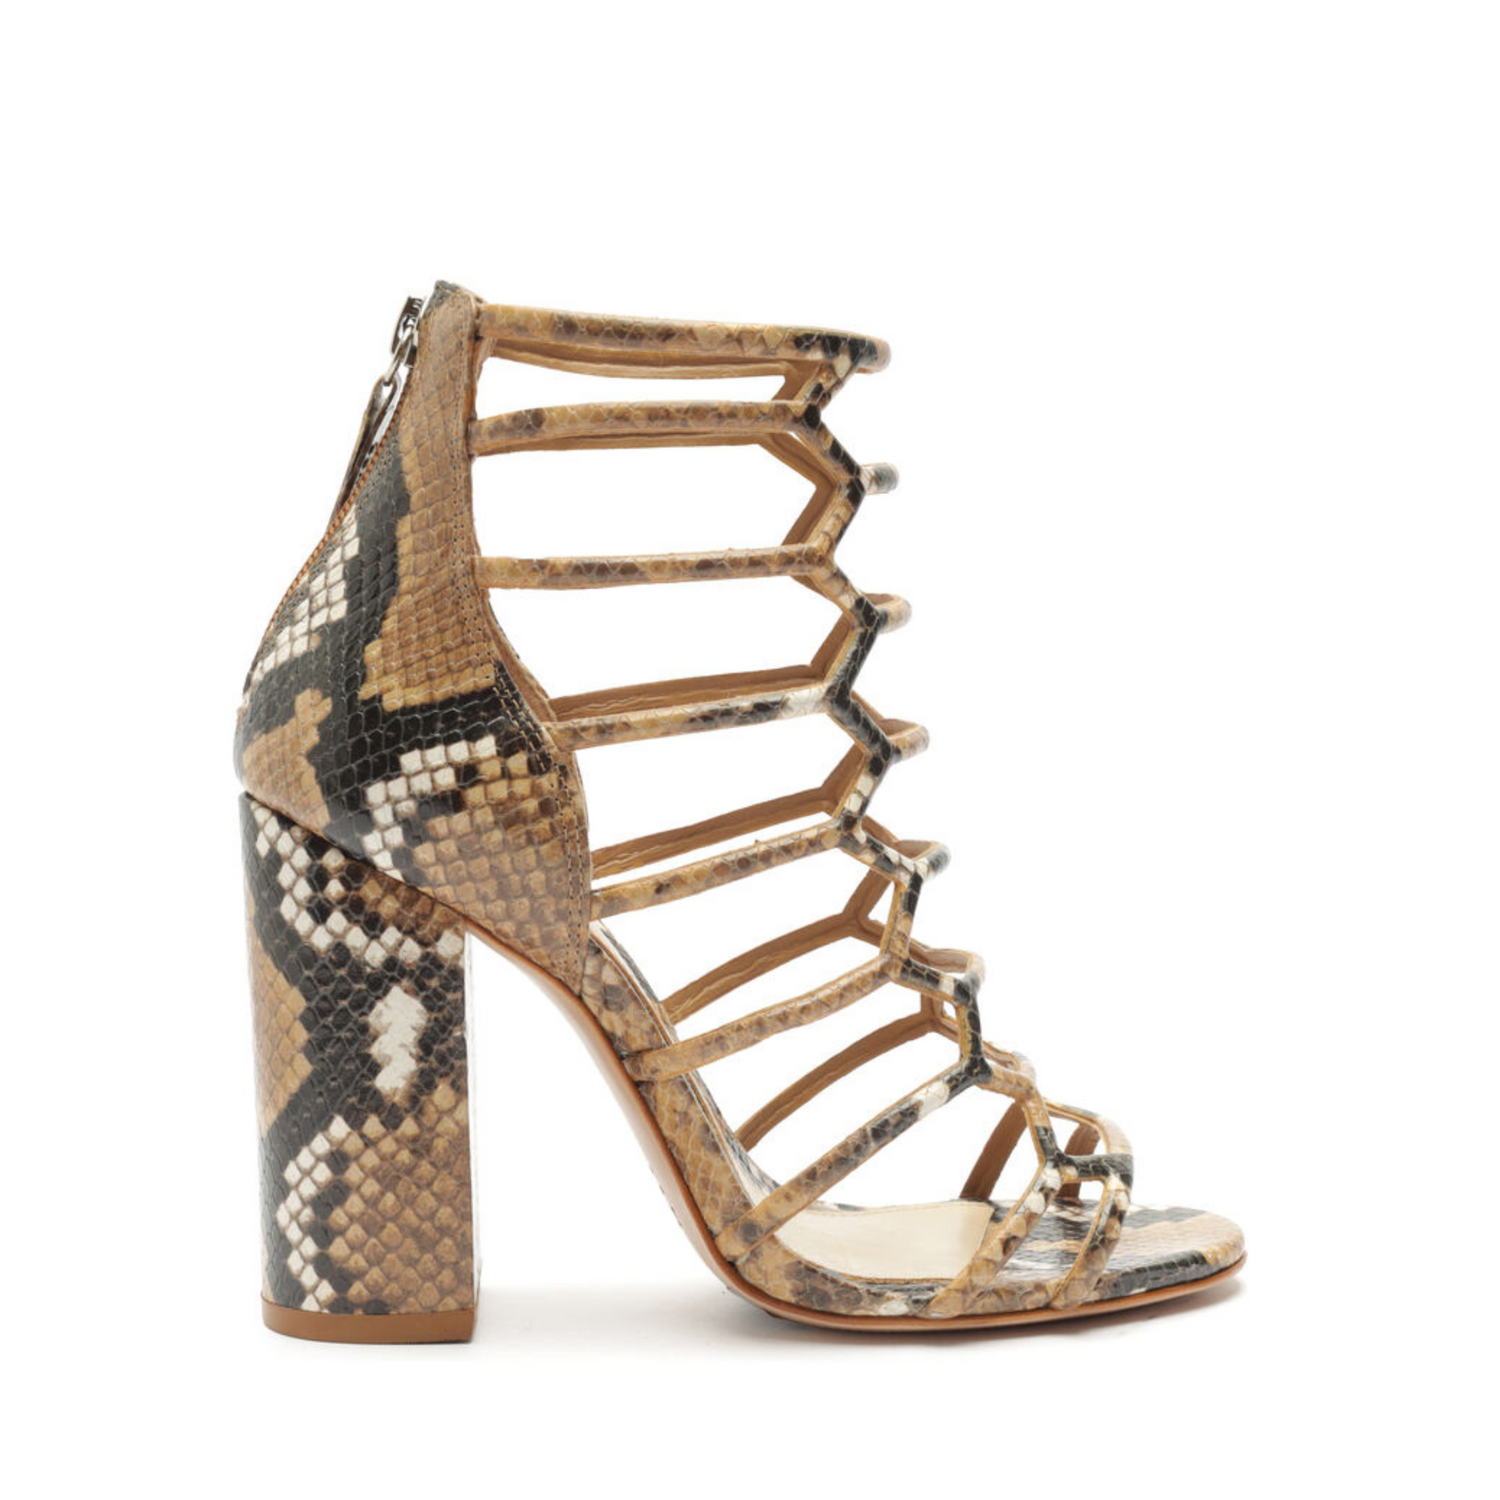 Wild Pair Heels|wild Pair Snake Print Heeled Sandals - Summer Party Ankle  Strap Shoes